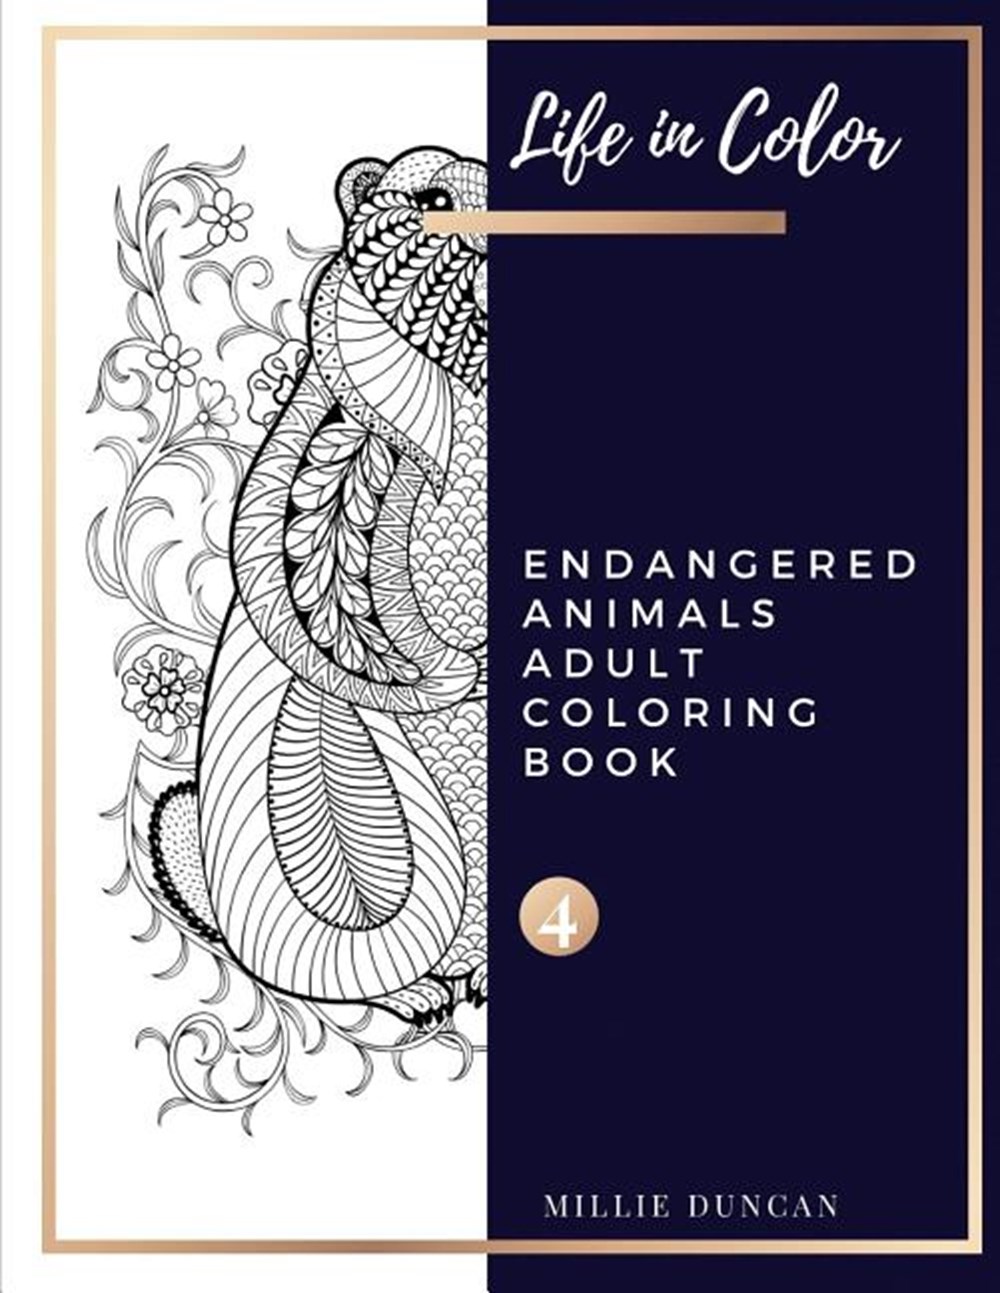 Download Endangered Animals Adult Coloring Book Book 4 In Paperback By Millie Duncan